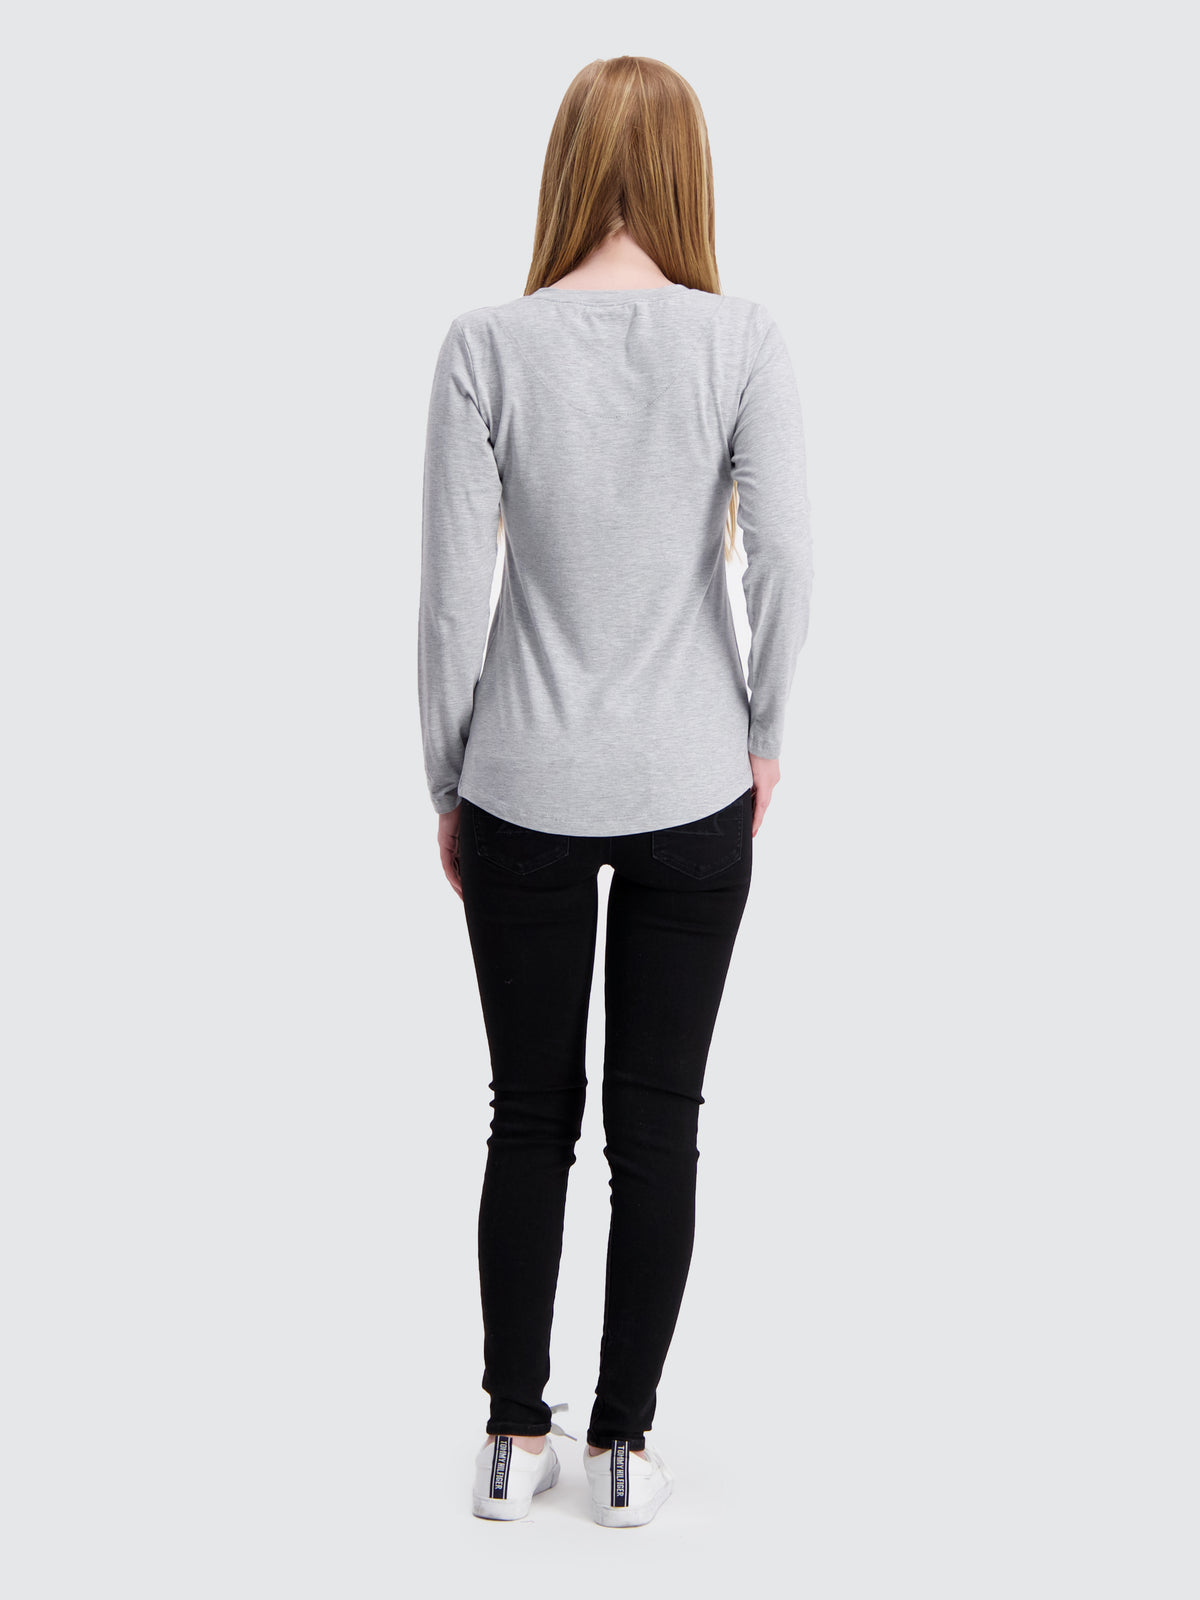 Two Blind Brothers - Womens Women's Long Sleeve Relaxed Fit Henley Light-Grey